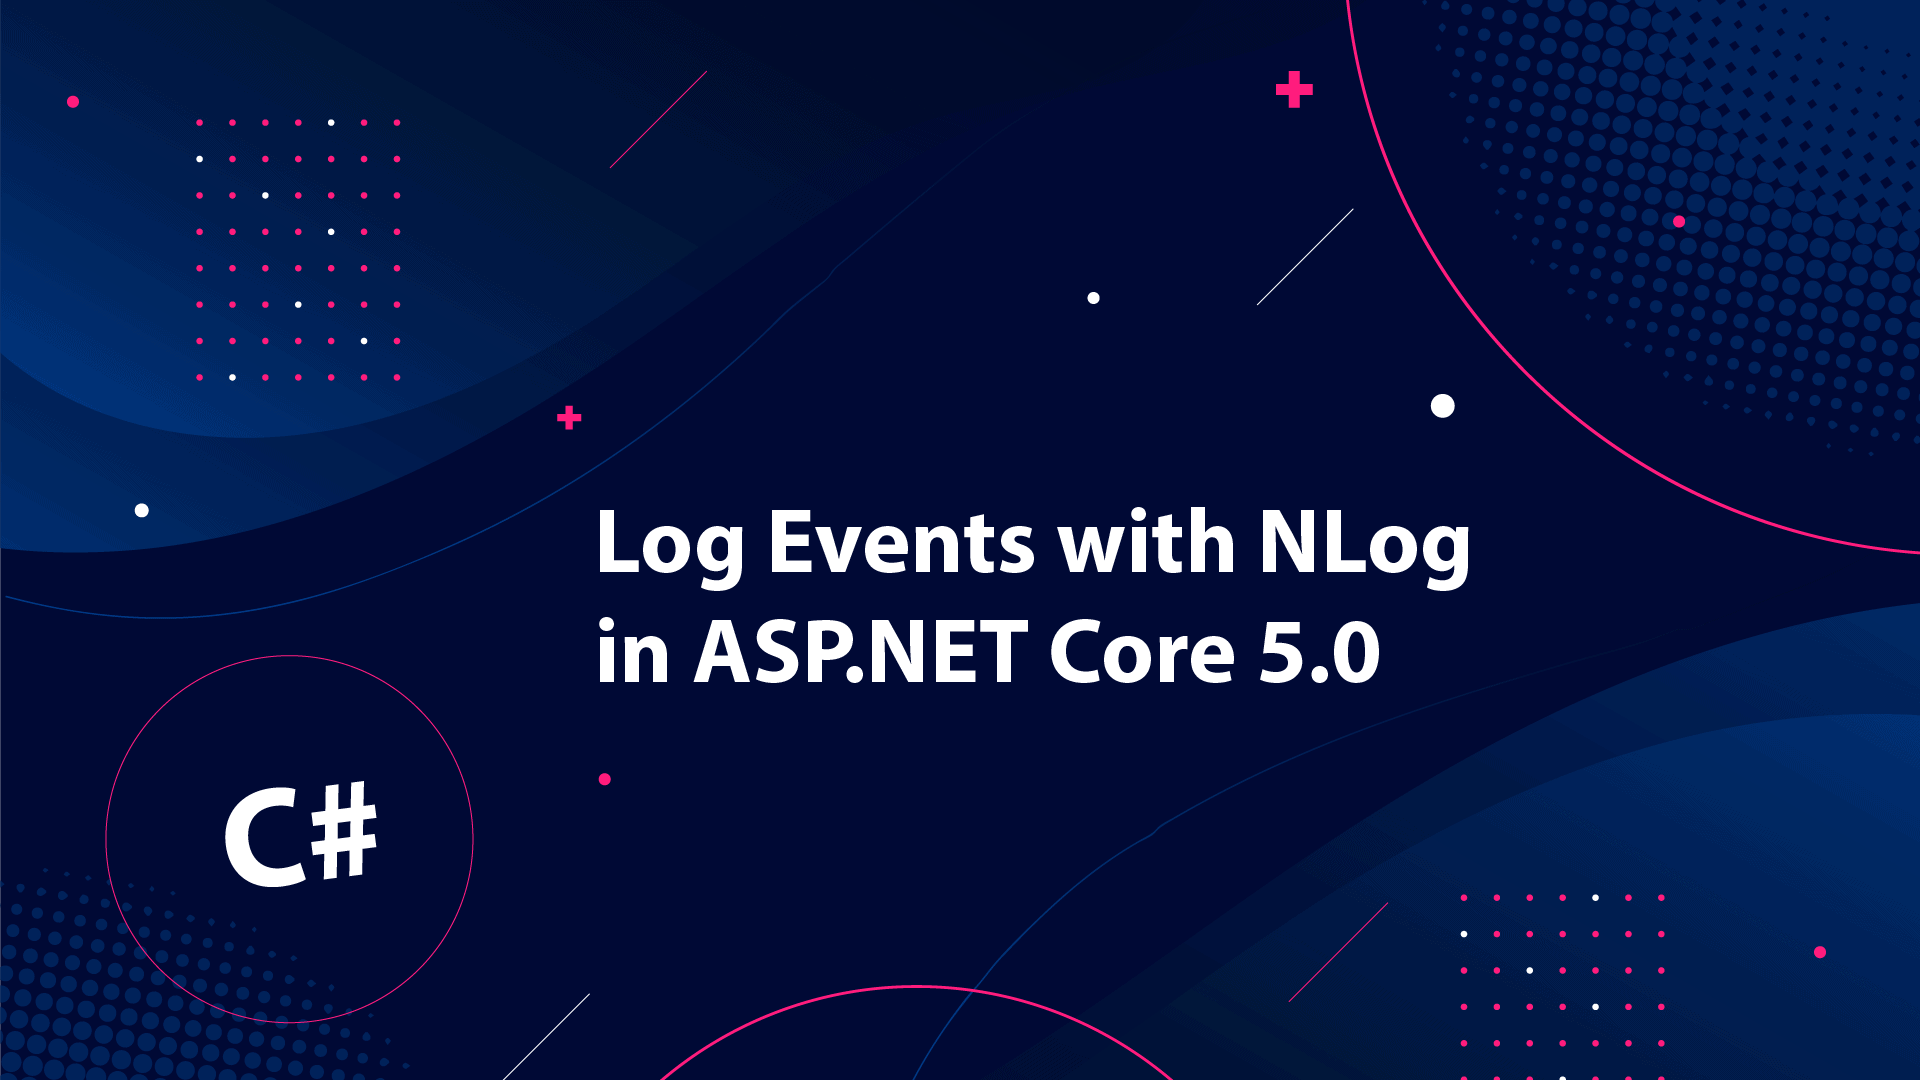 Log events with NLog in ASP.NET Core 5